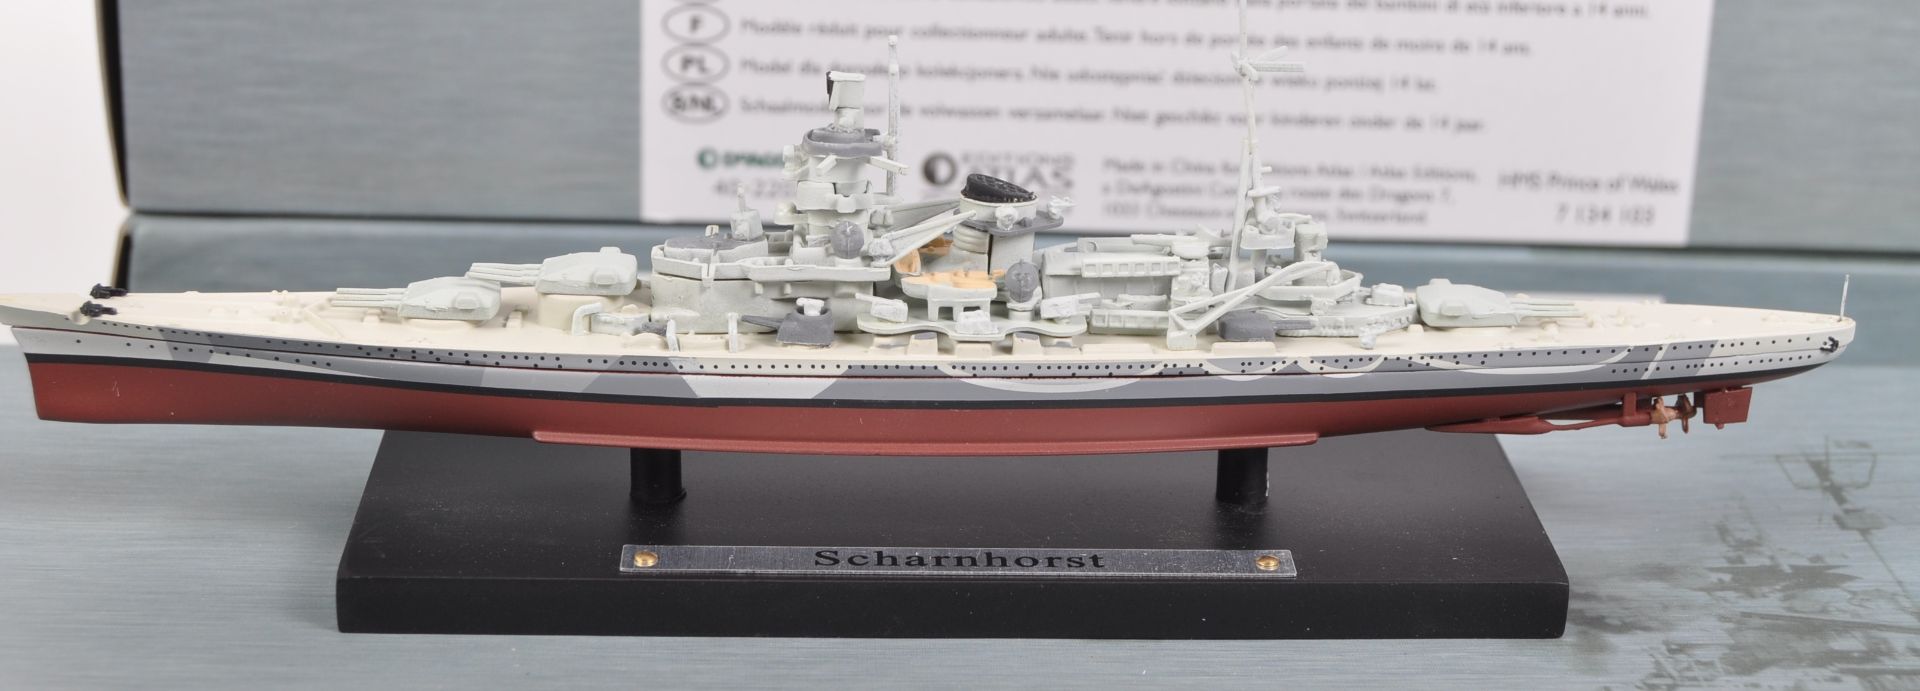 COLLECTION OF ATLAS EDITIONS SCALE MODEL BATTLESHIPS - Image 4 of 5